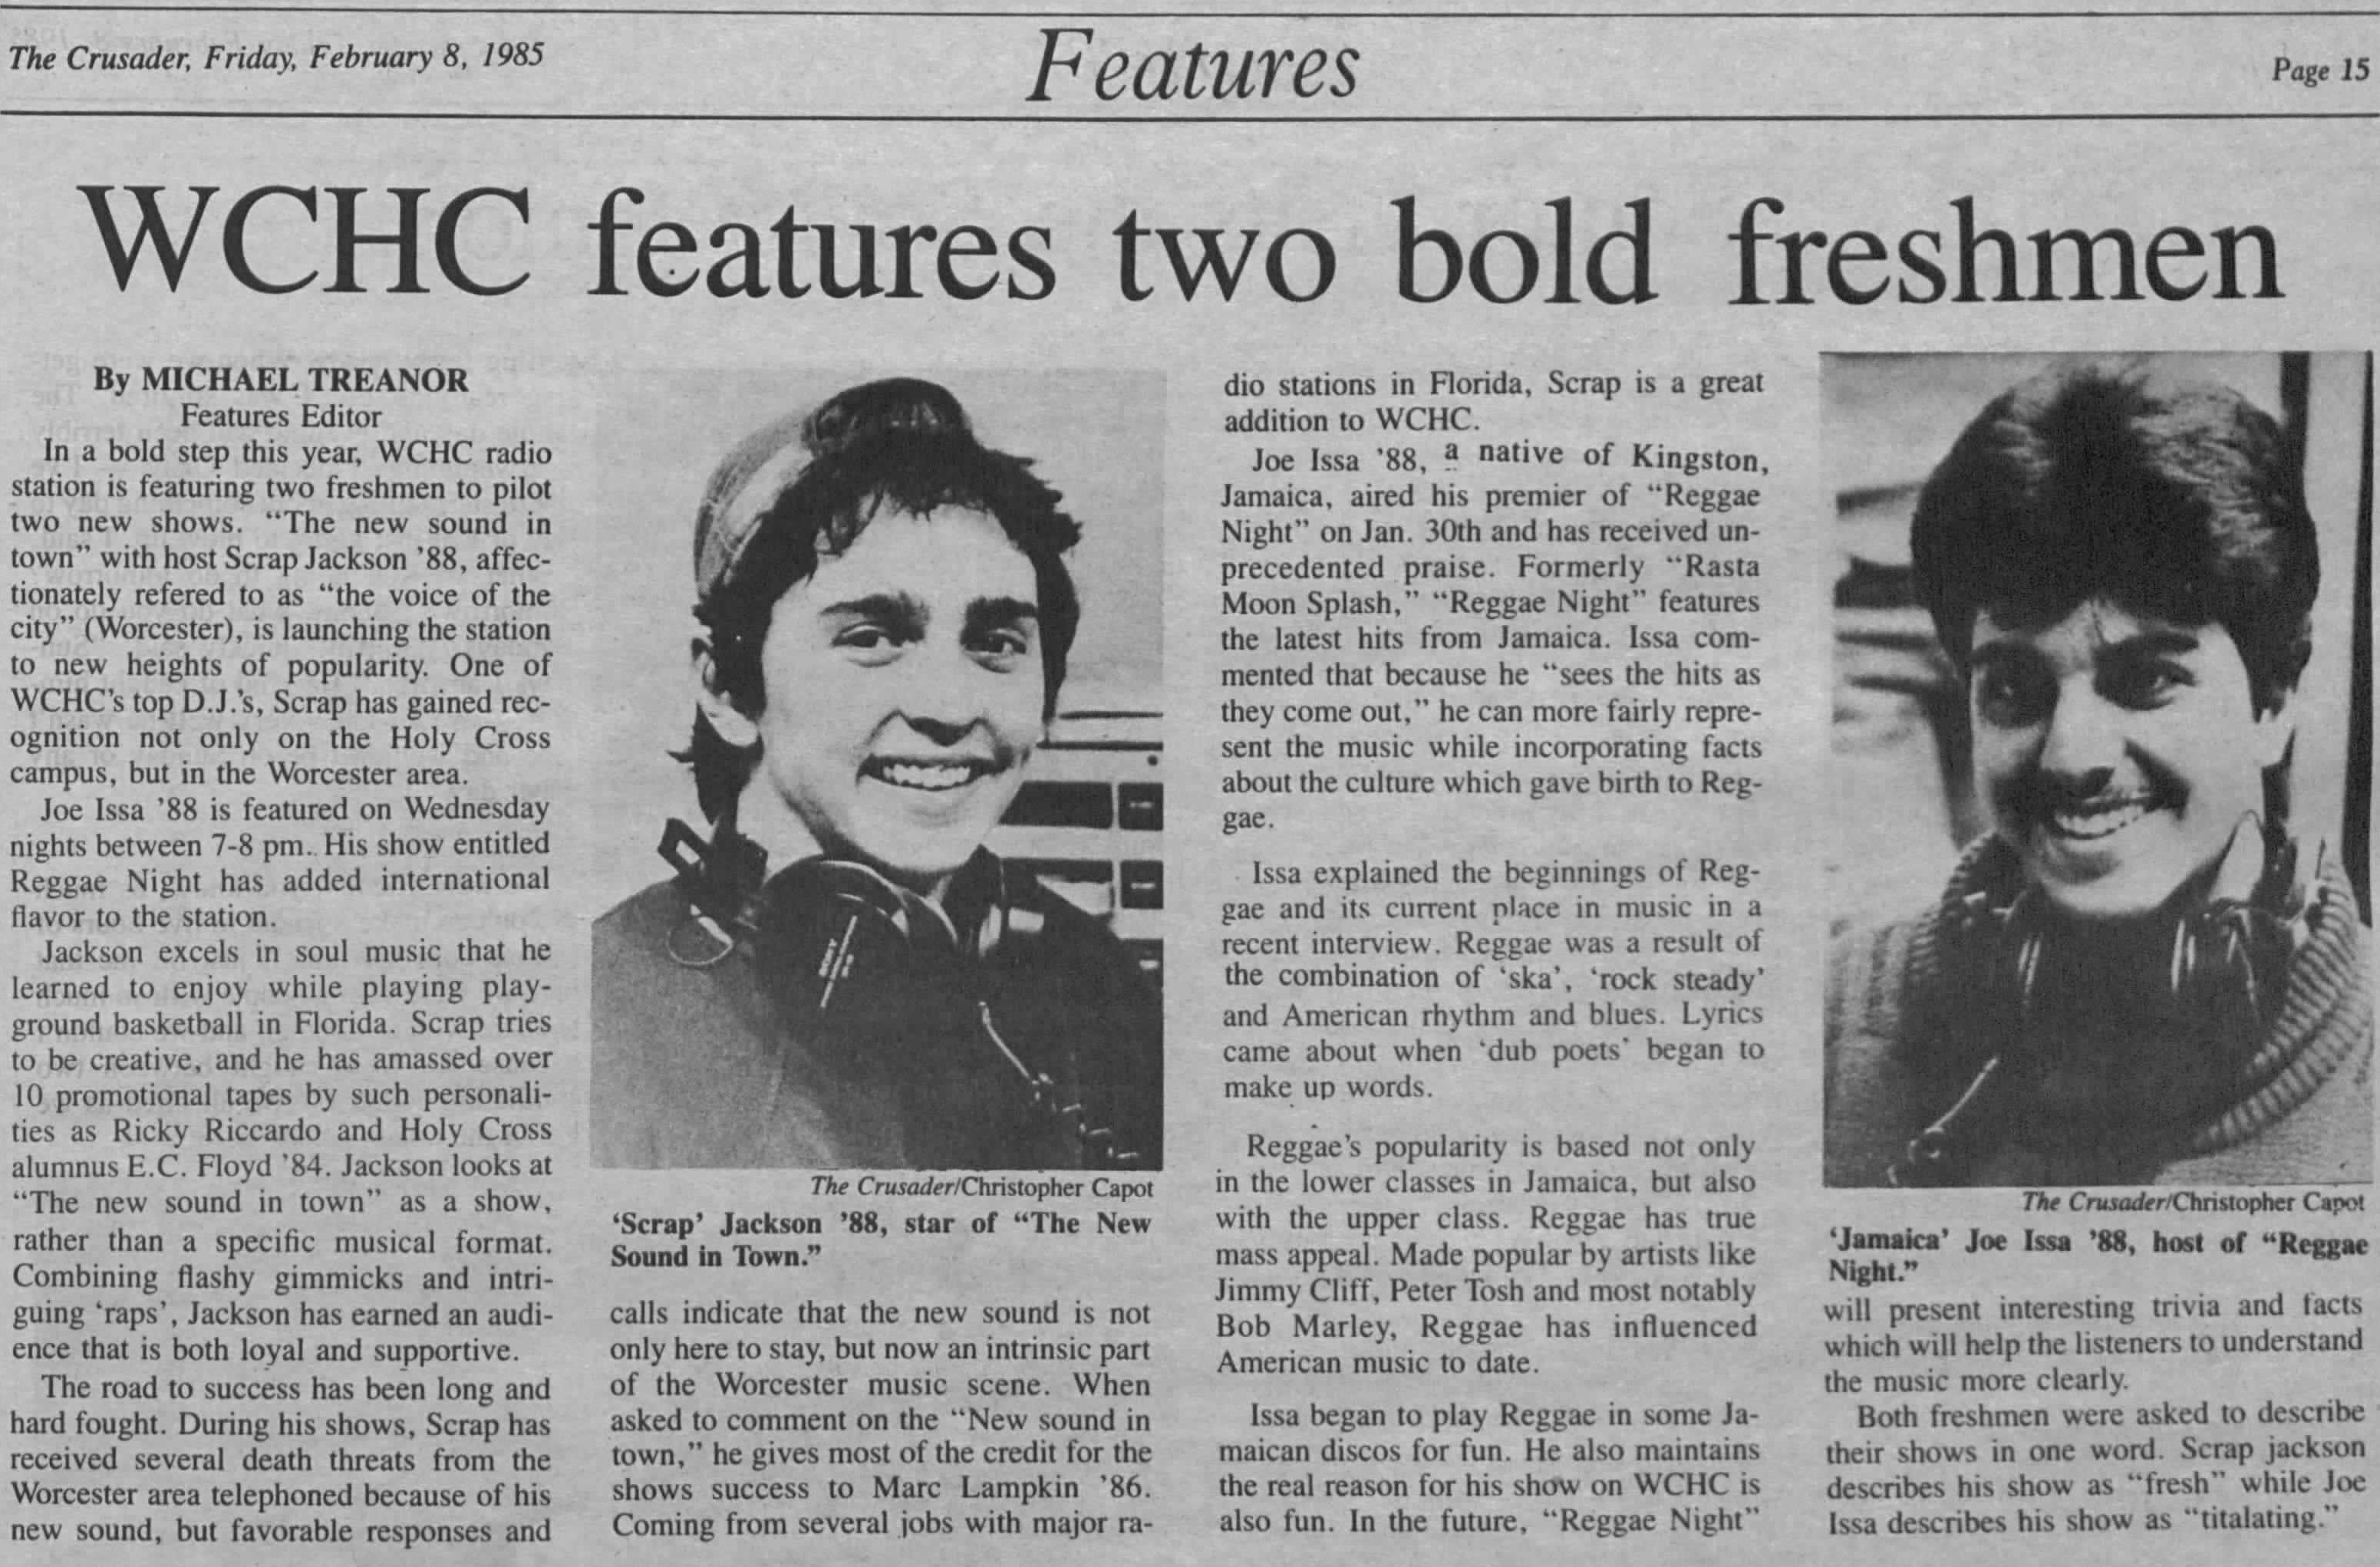 WCHC features two bold freshmen - The Crusader - February 8, 1985